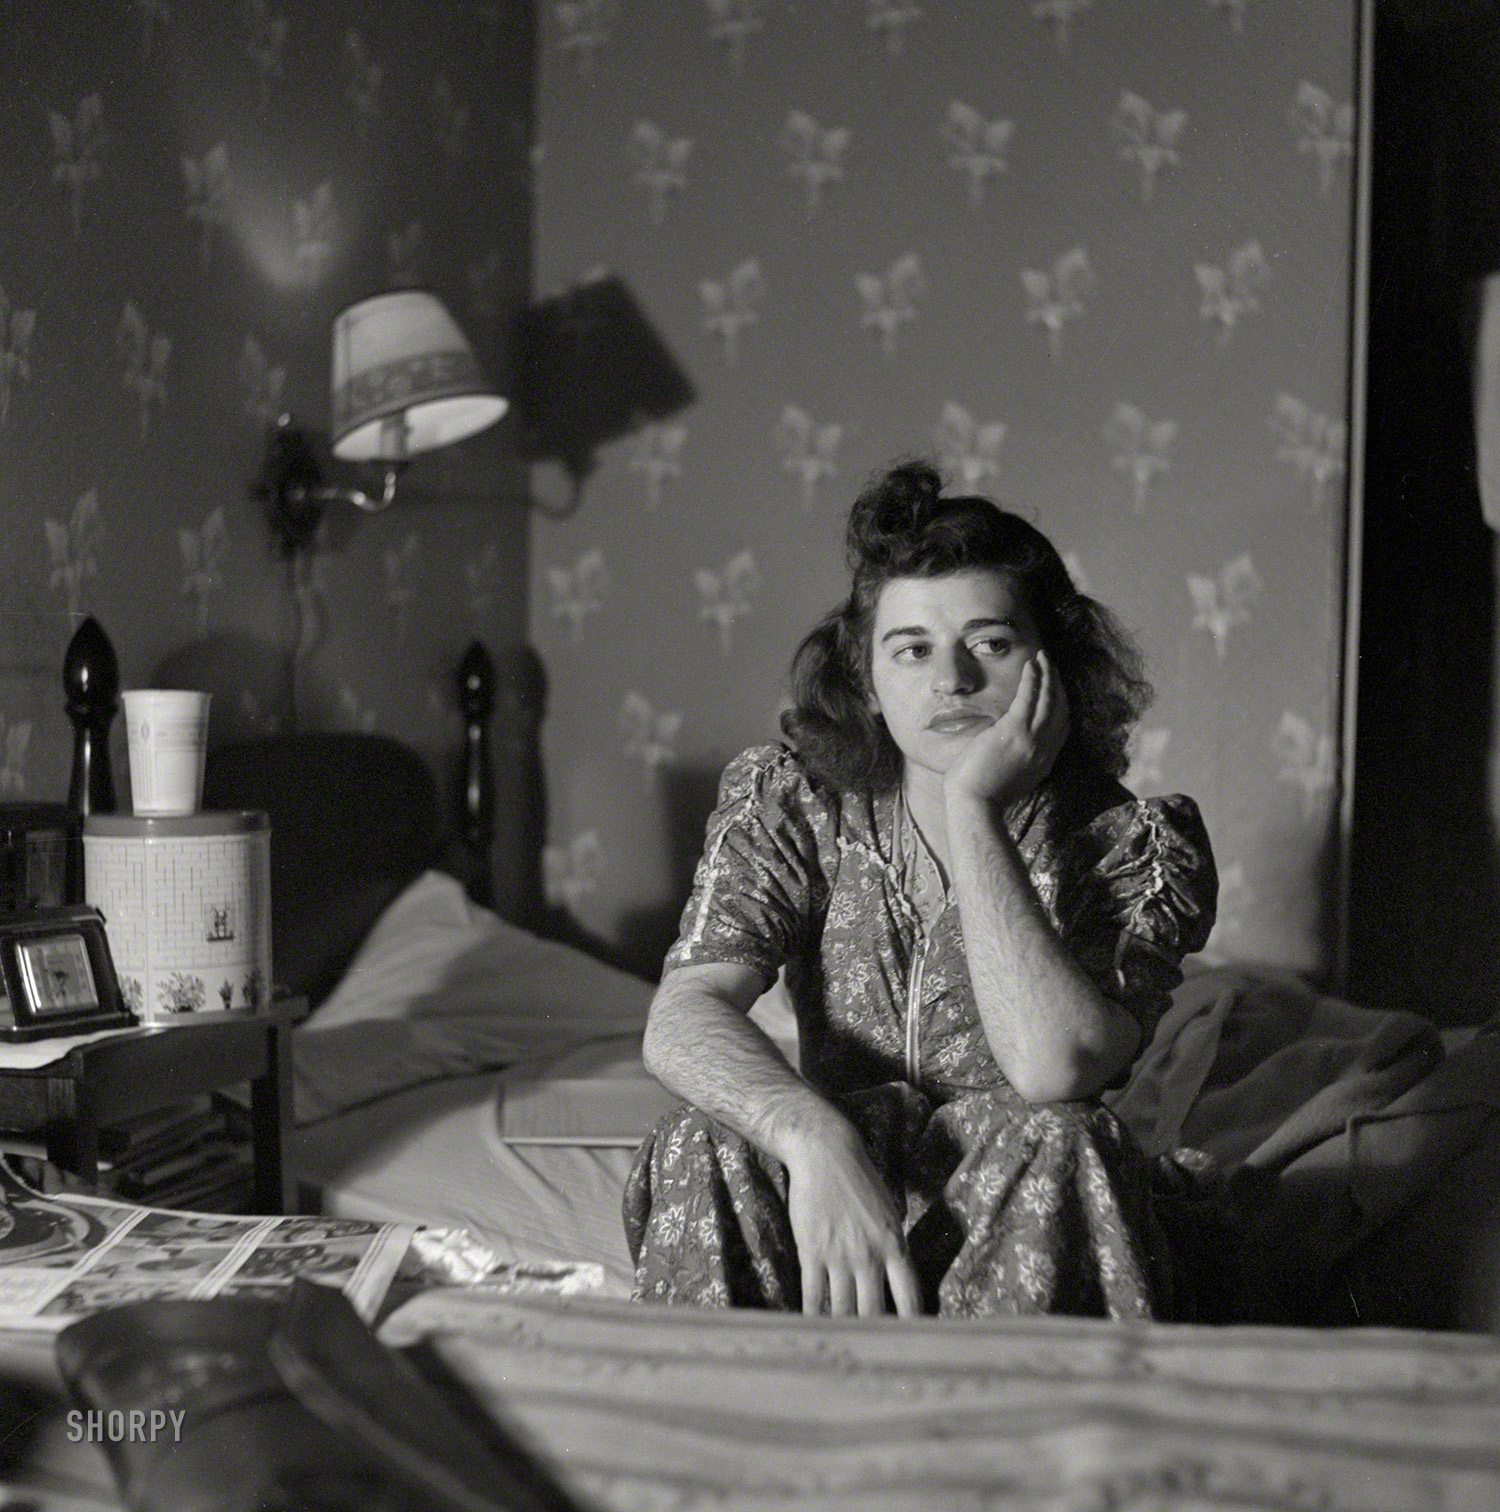 January 1943. Washington, D.C. "Pearl Ginsburg refused to have her boardinghouse rent raised." Medium format nitrate negative by Esther Bubley for the Office of War Information. View full size.